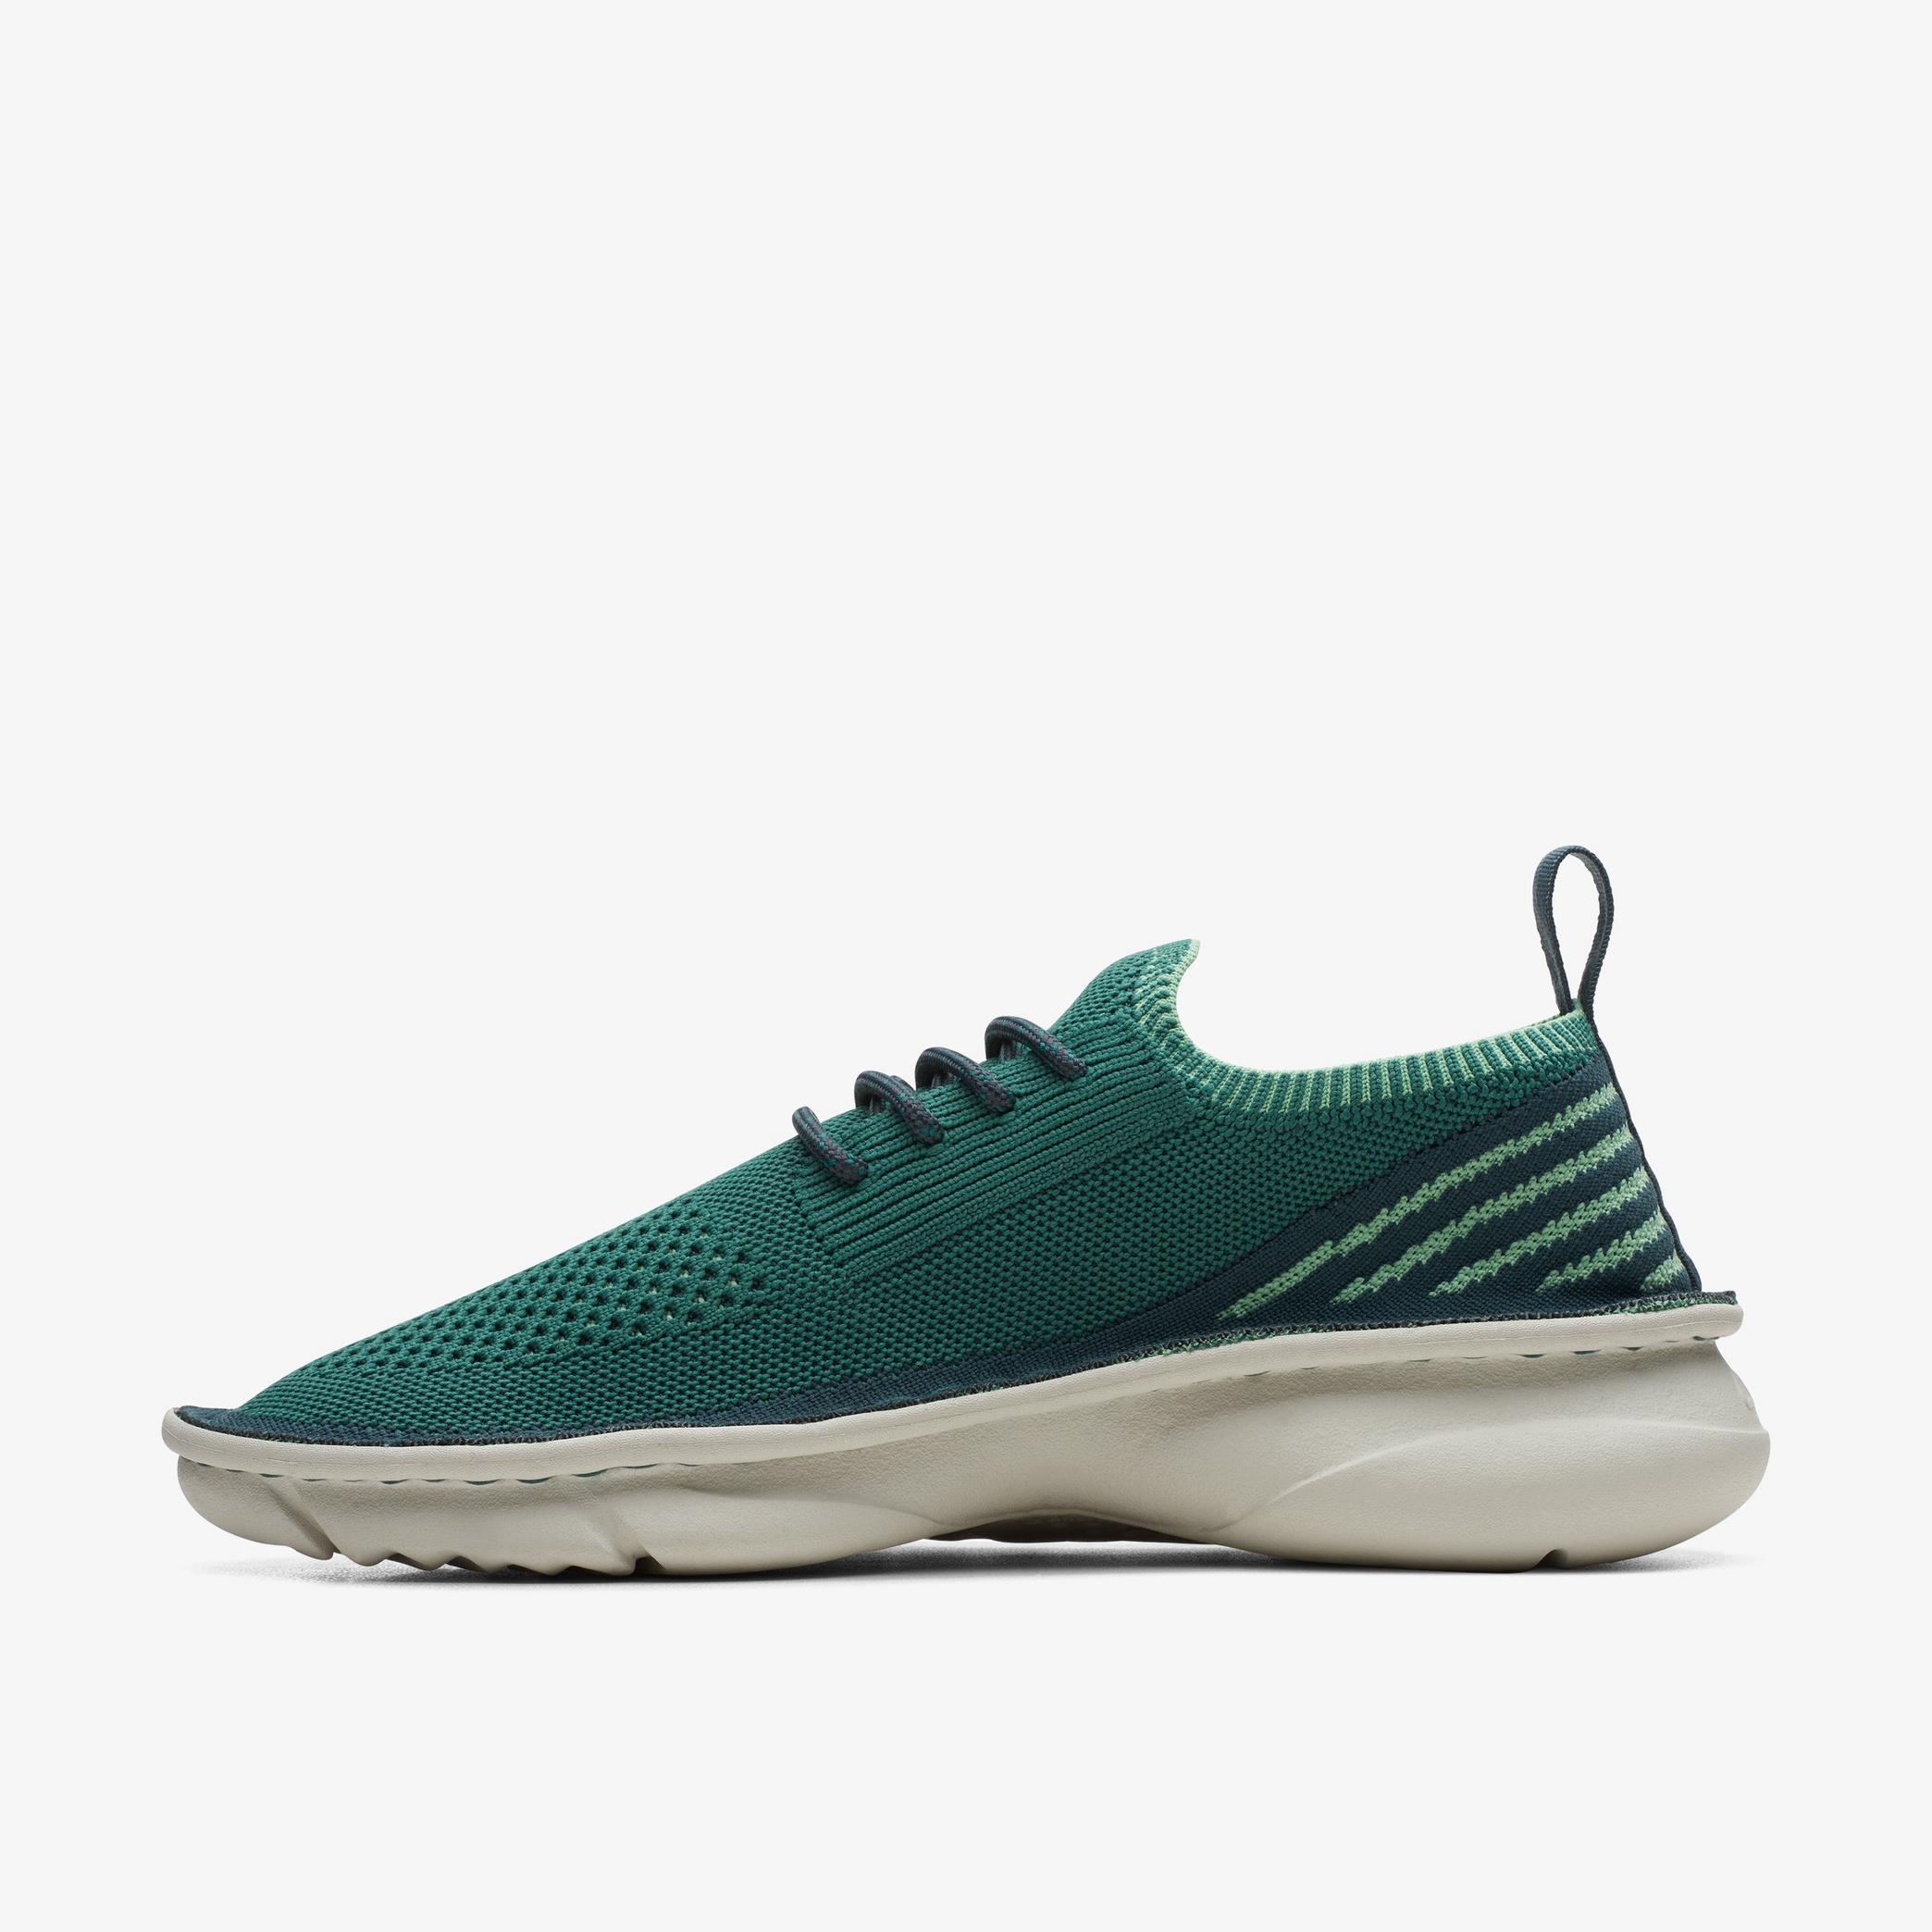 Clarks Origin2 Green Knit Trainers, view 2 of 6